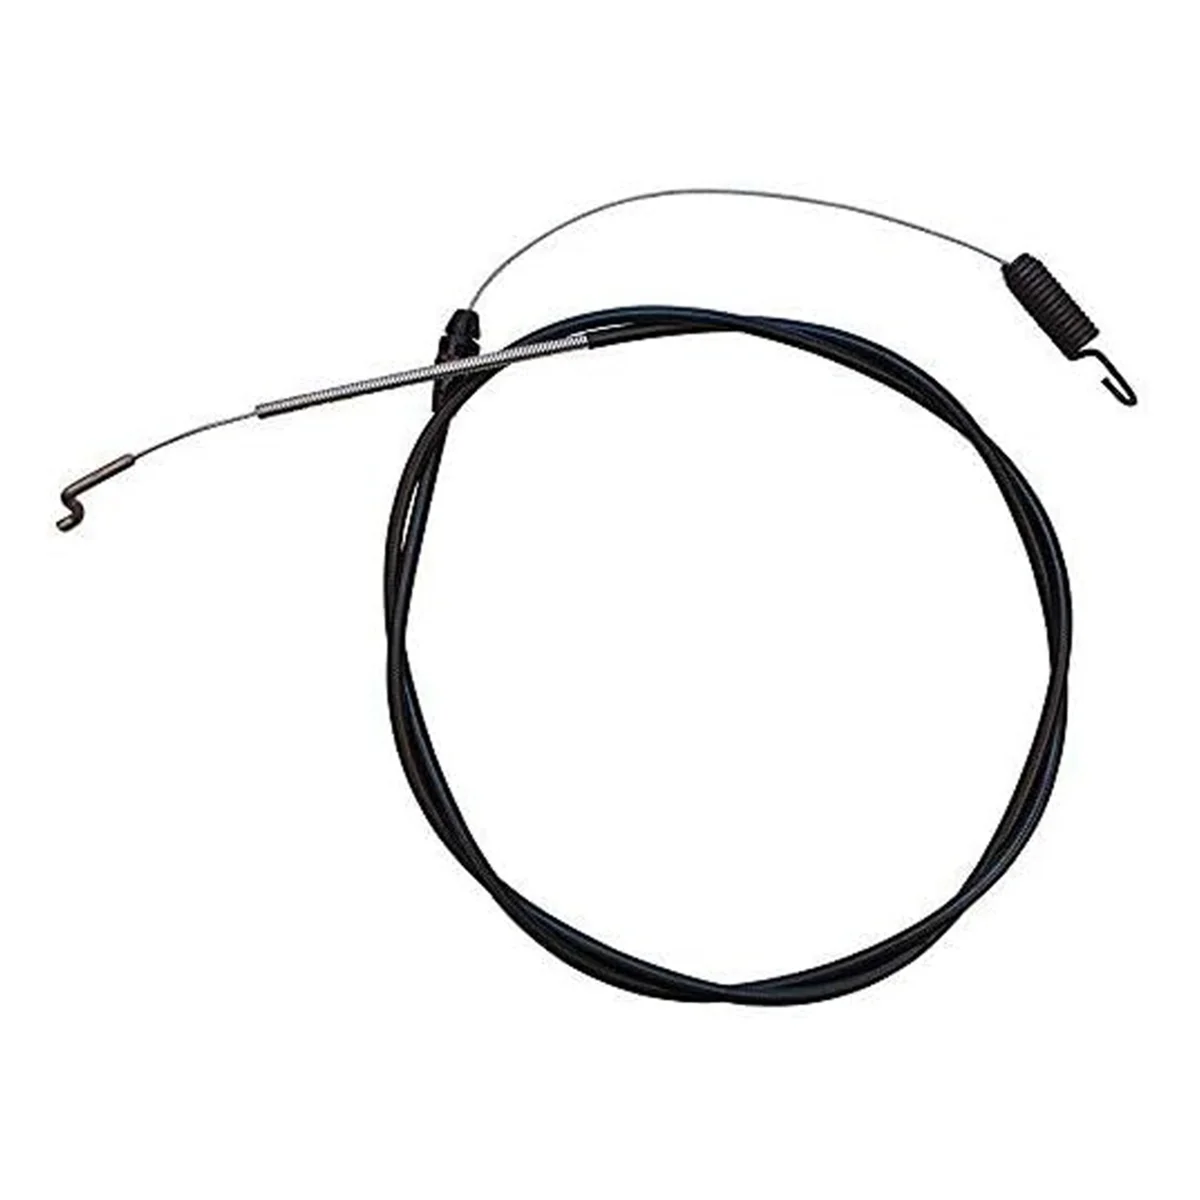 

Replacement Traction Cable for Toro Front Drive Self Propelled Lawn Mowers 105-1845 Recycler